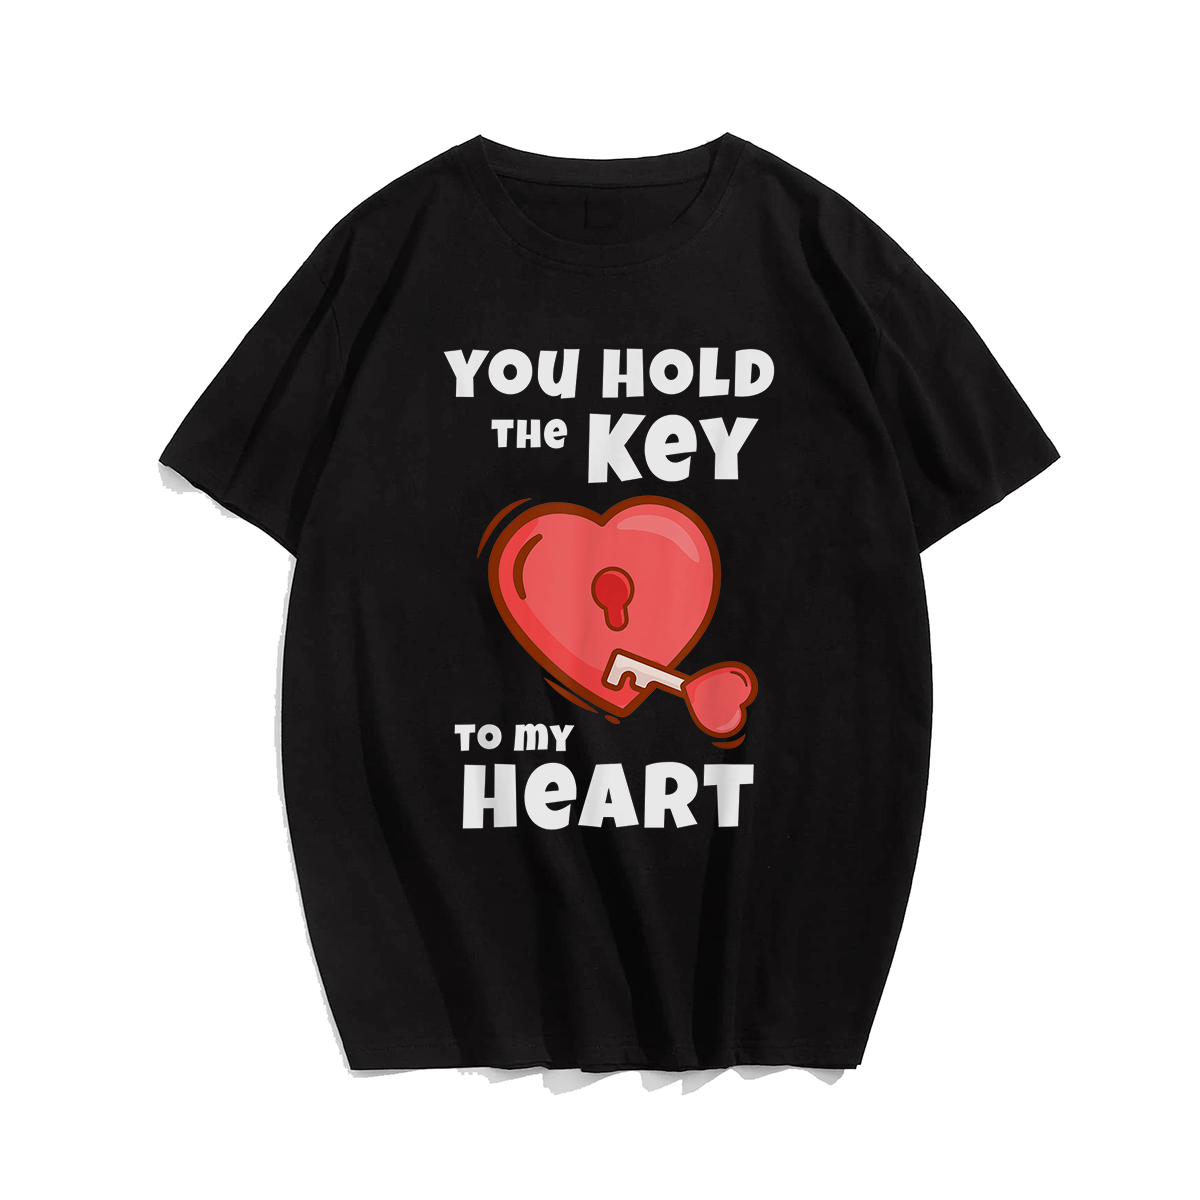 You Hold The Key To My Heart Funny Valentines Day T-Shirt, Men Plus Size Oversize T-shirt for Big & Tall Man